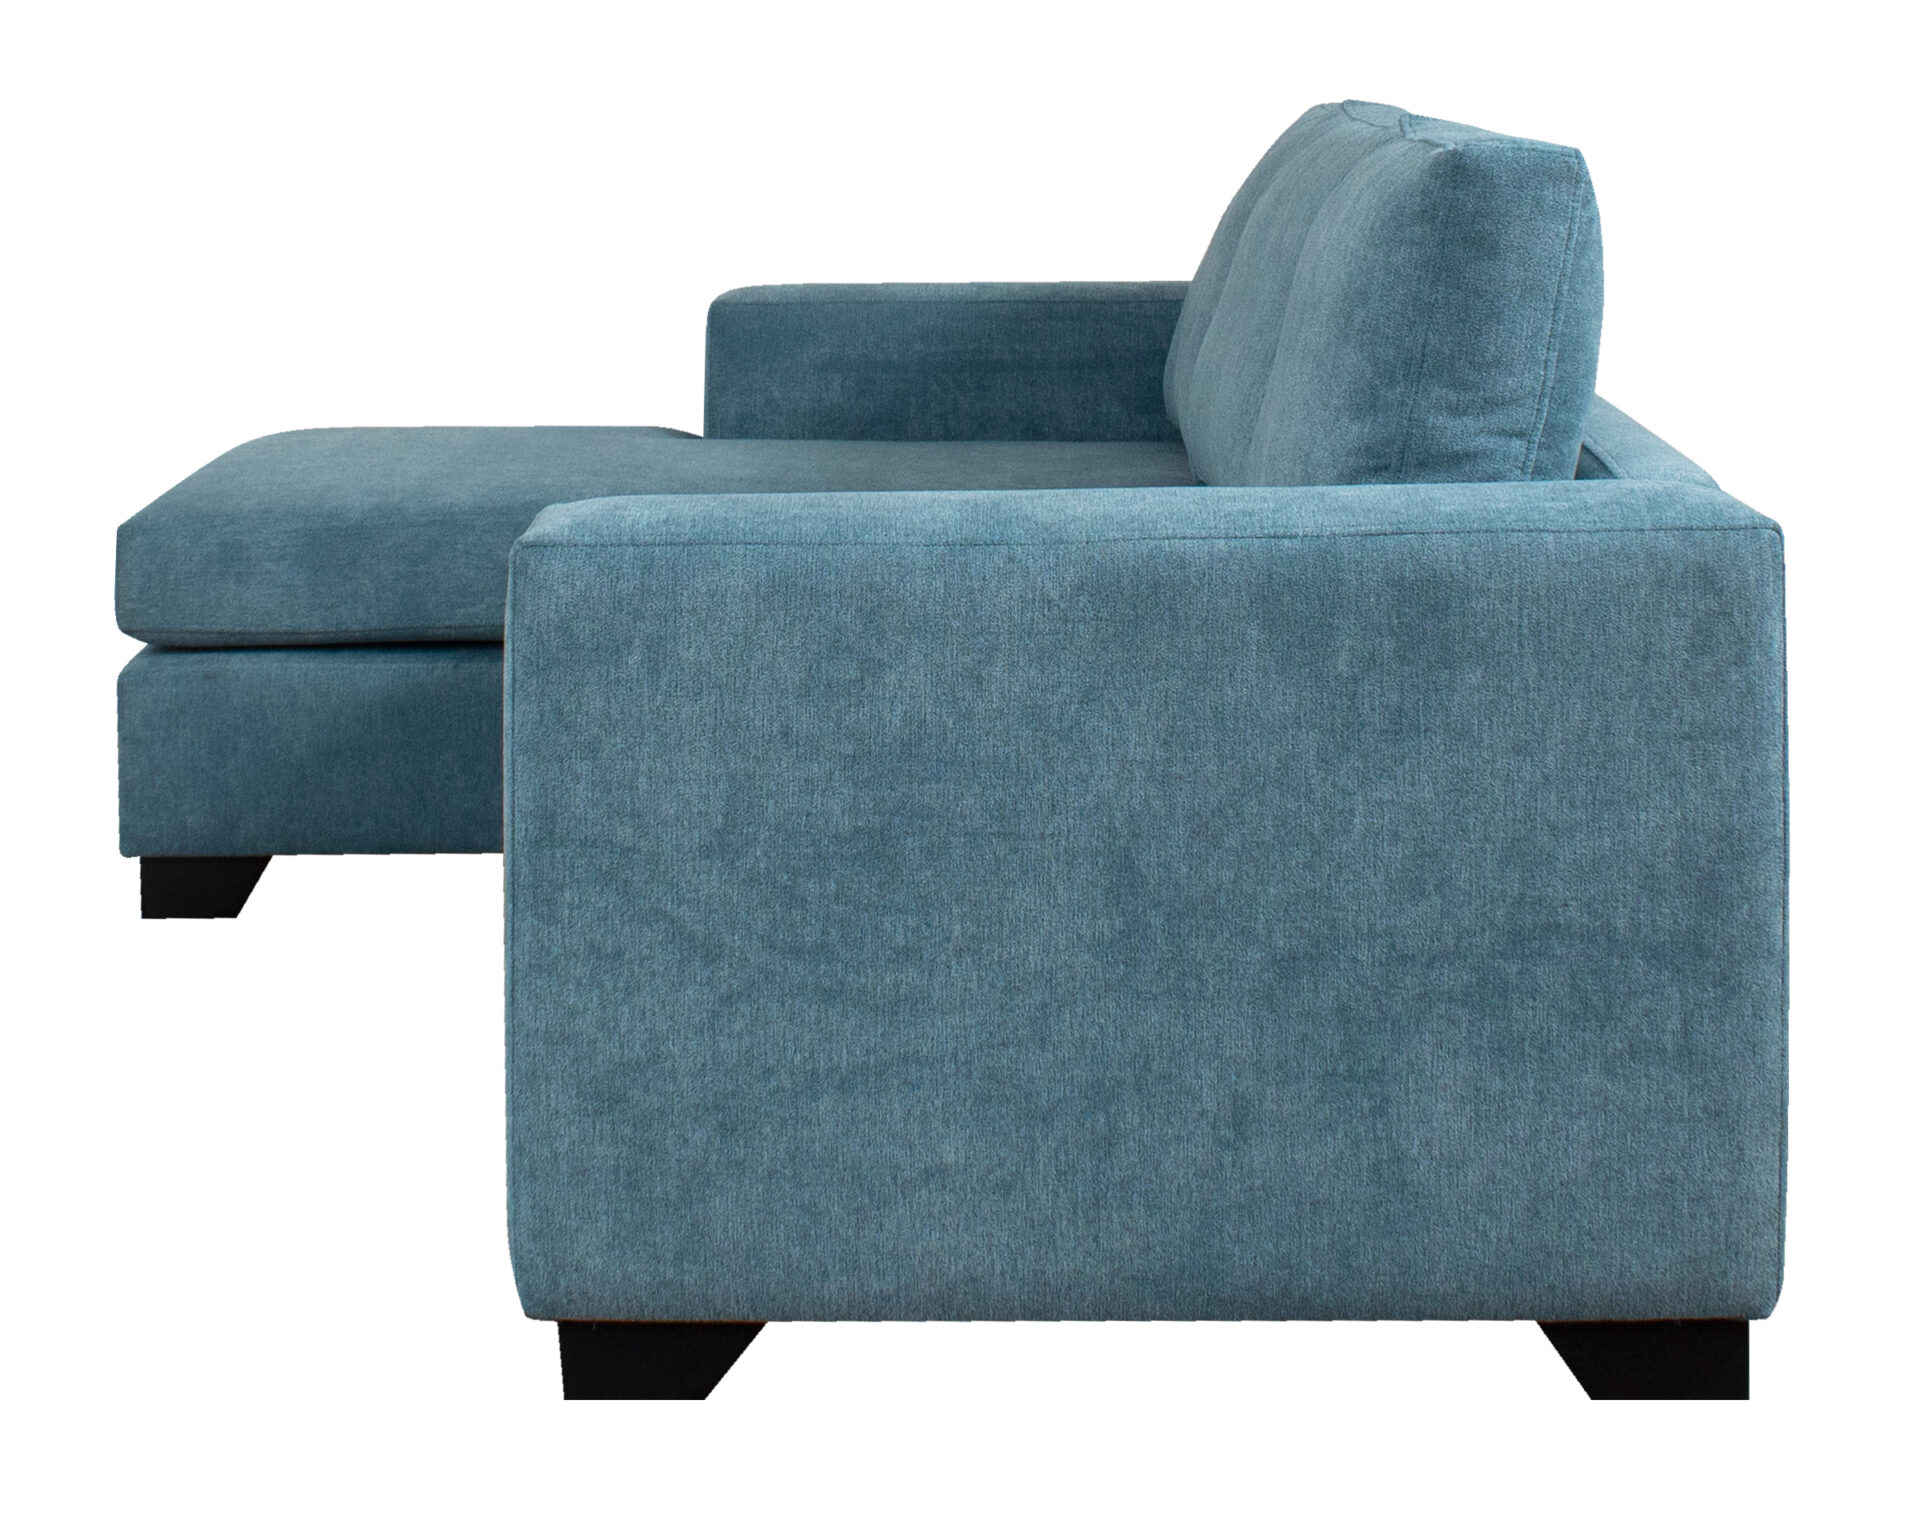 sofa modular 3 cuerpos intercambiable finesse royal lateral 1111